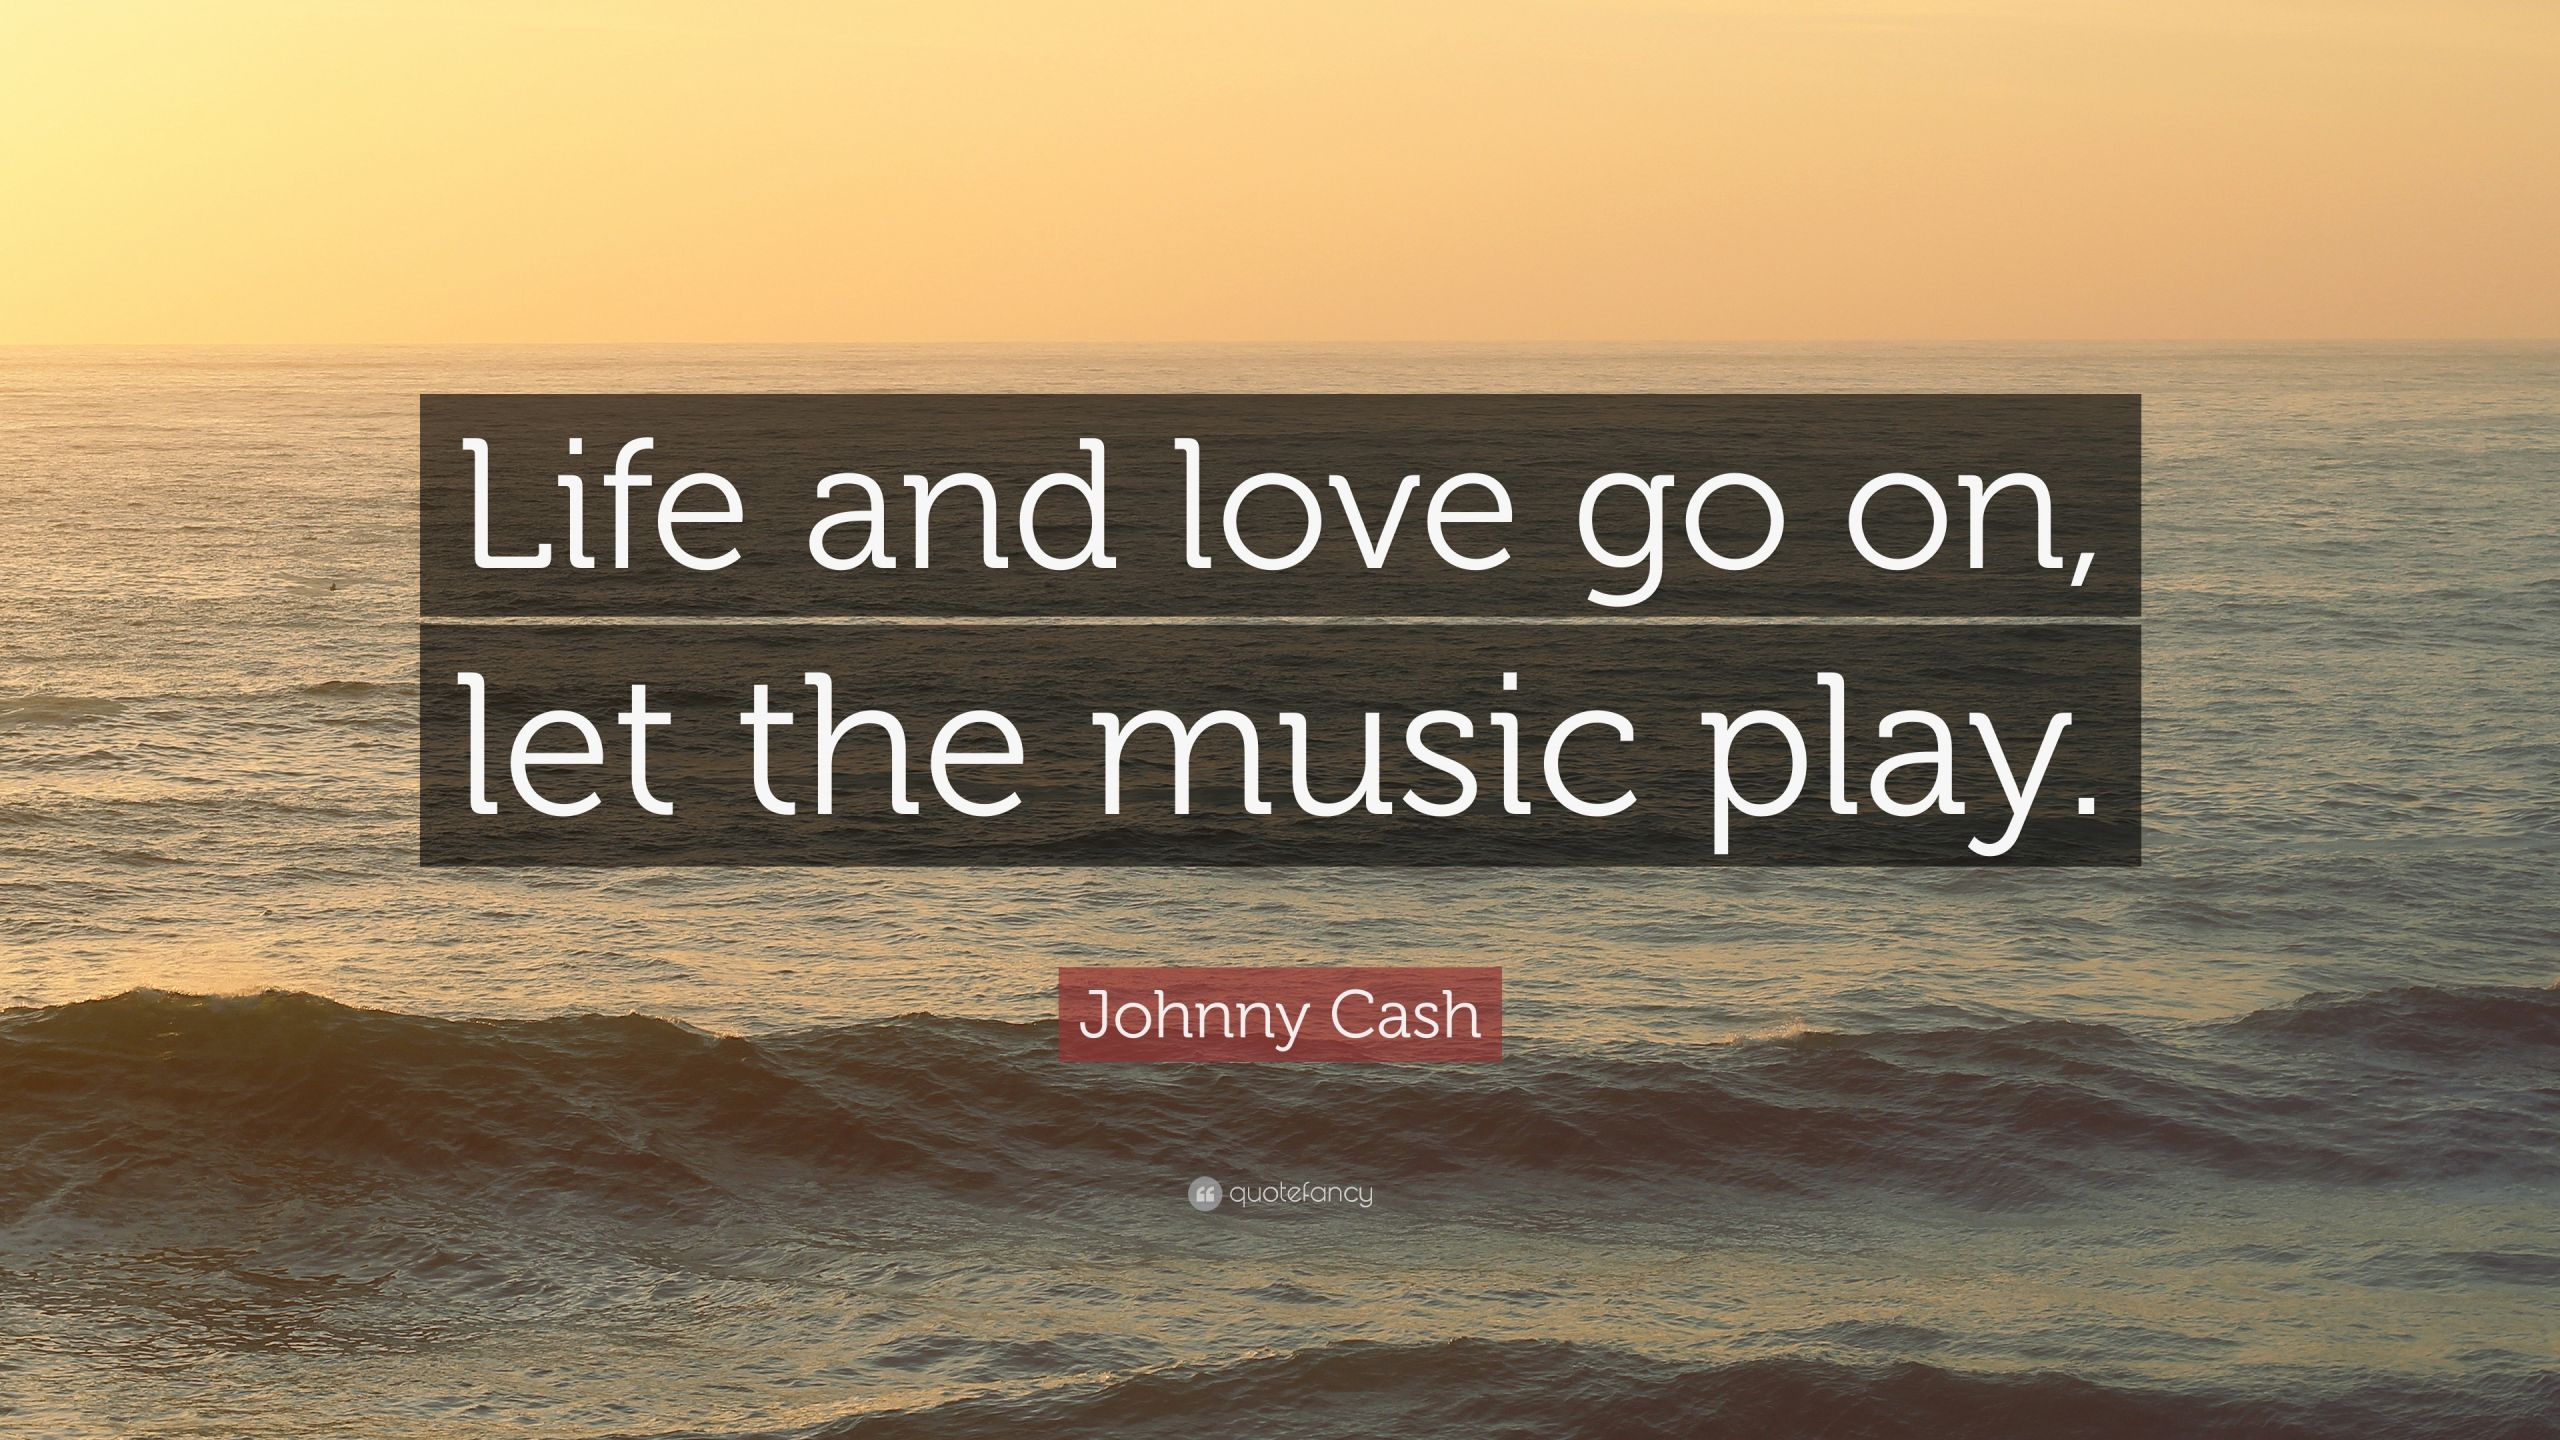 Johnny Cash Love Quotes
 Johnny Cash Quote “Life and love go on let the music